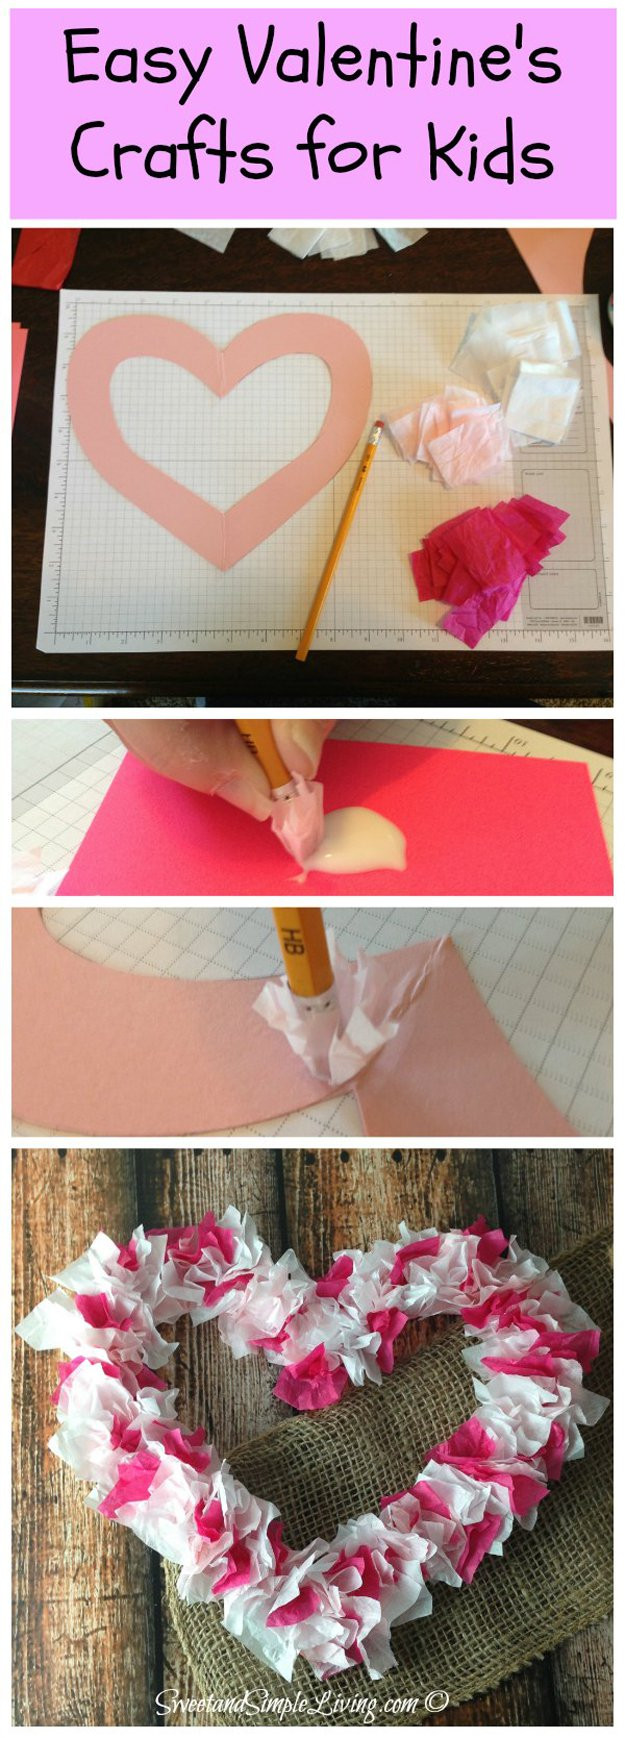 Valentines Craft Ideas For Toddlers
 20 Homemade Valentine Crafts For Kids To Make DIY Ready